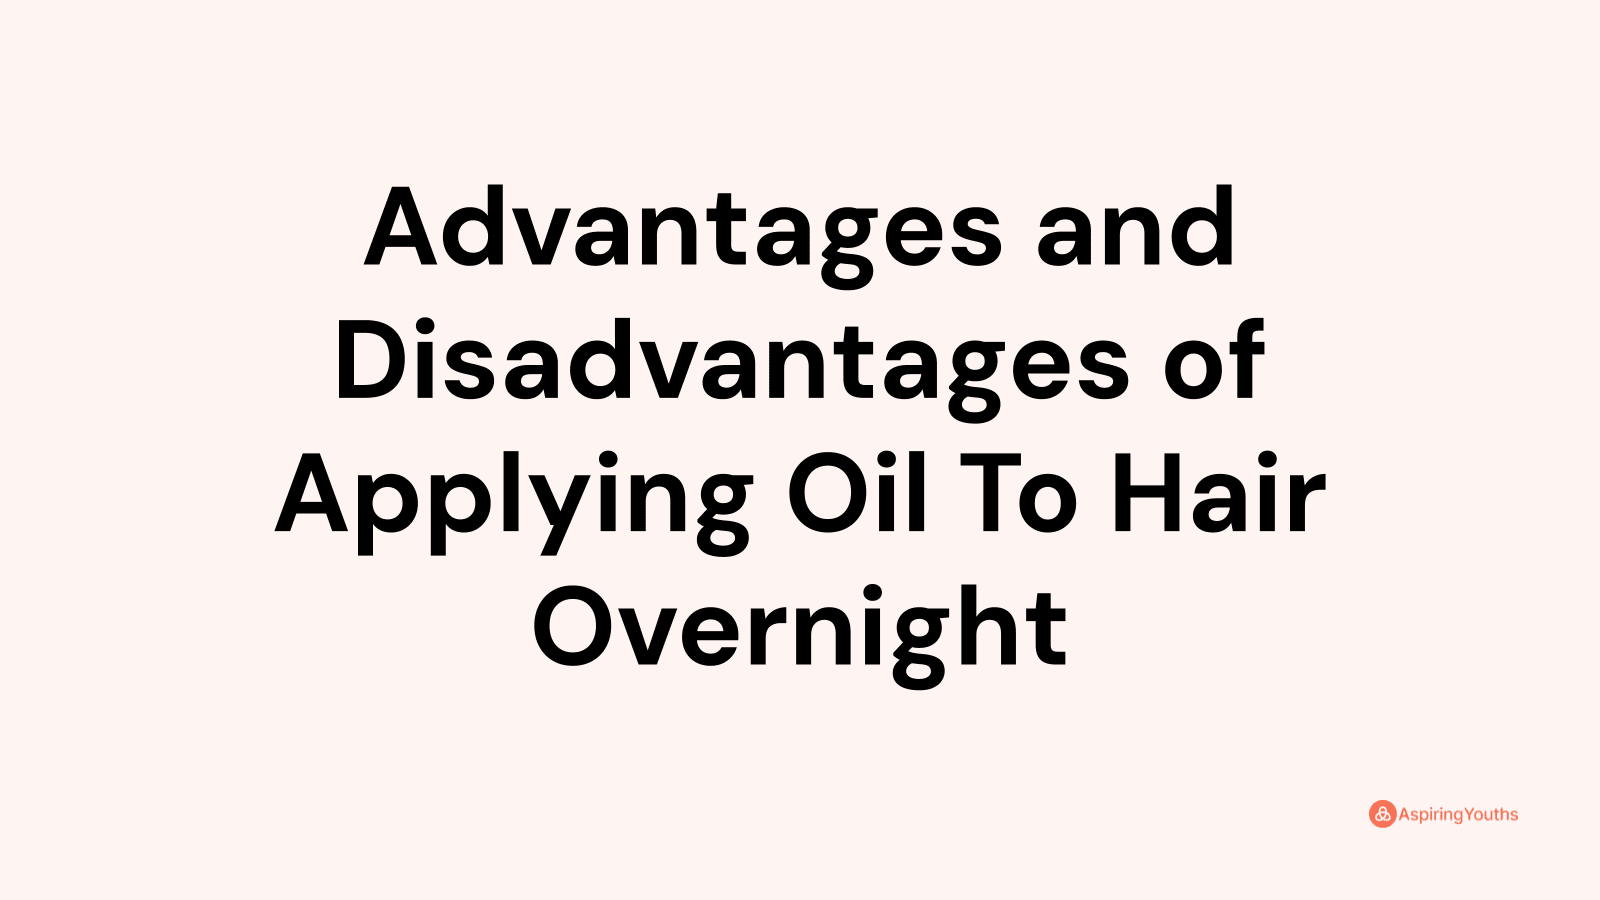 Advantages and disadvantages of Applying Oil To Hair Overnight